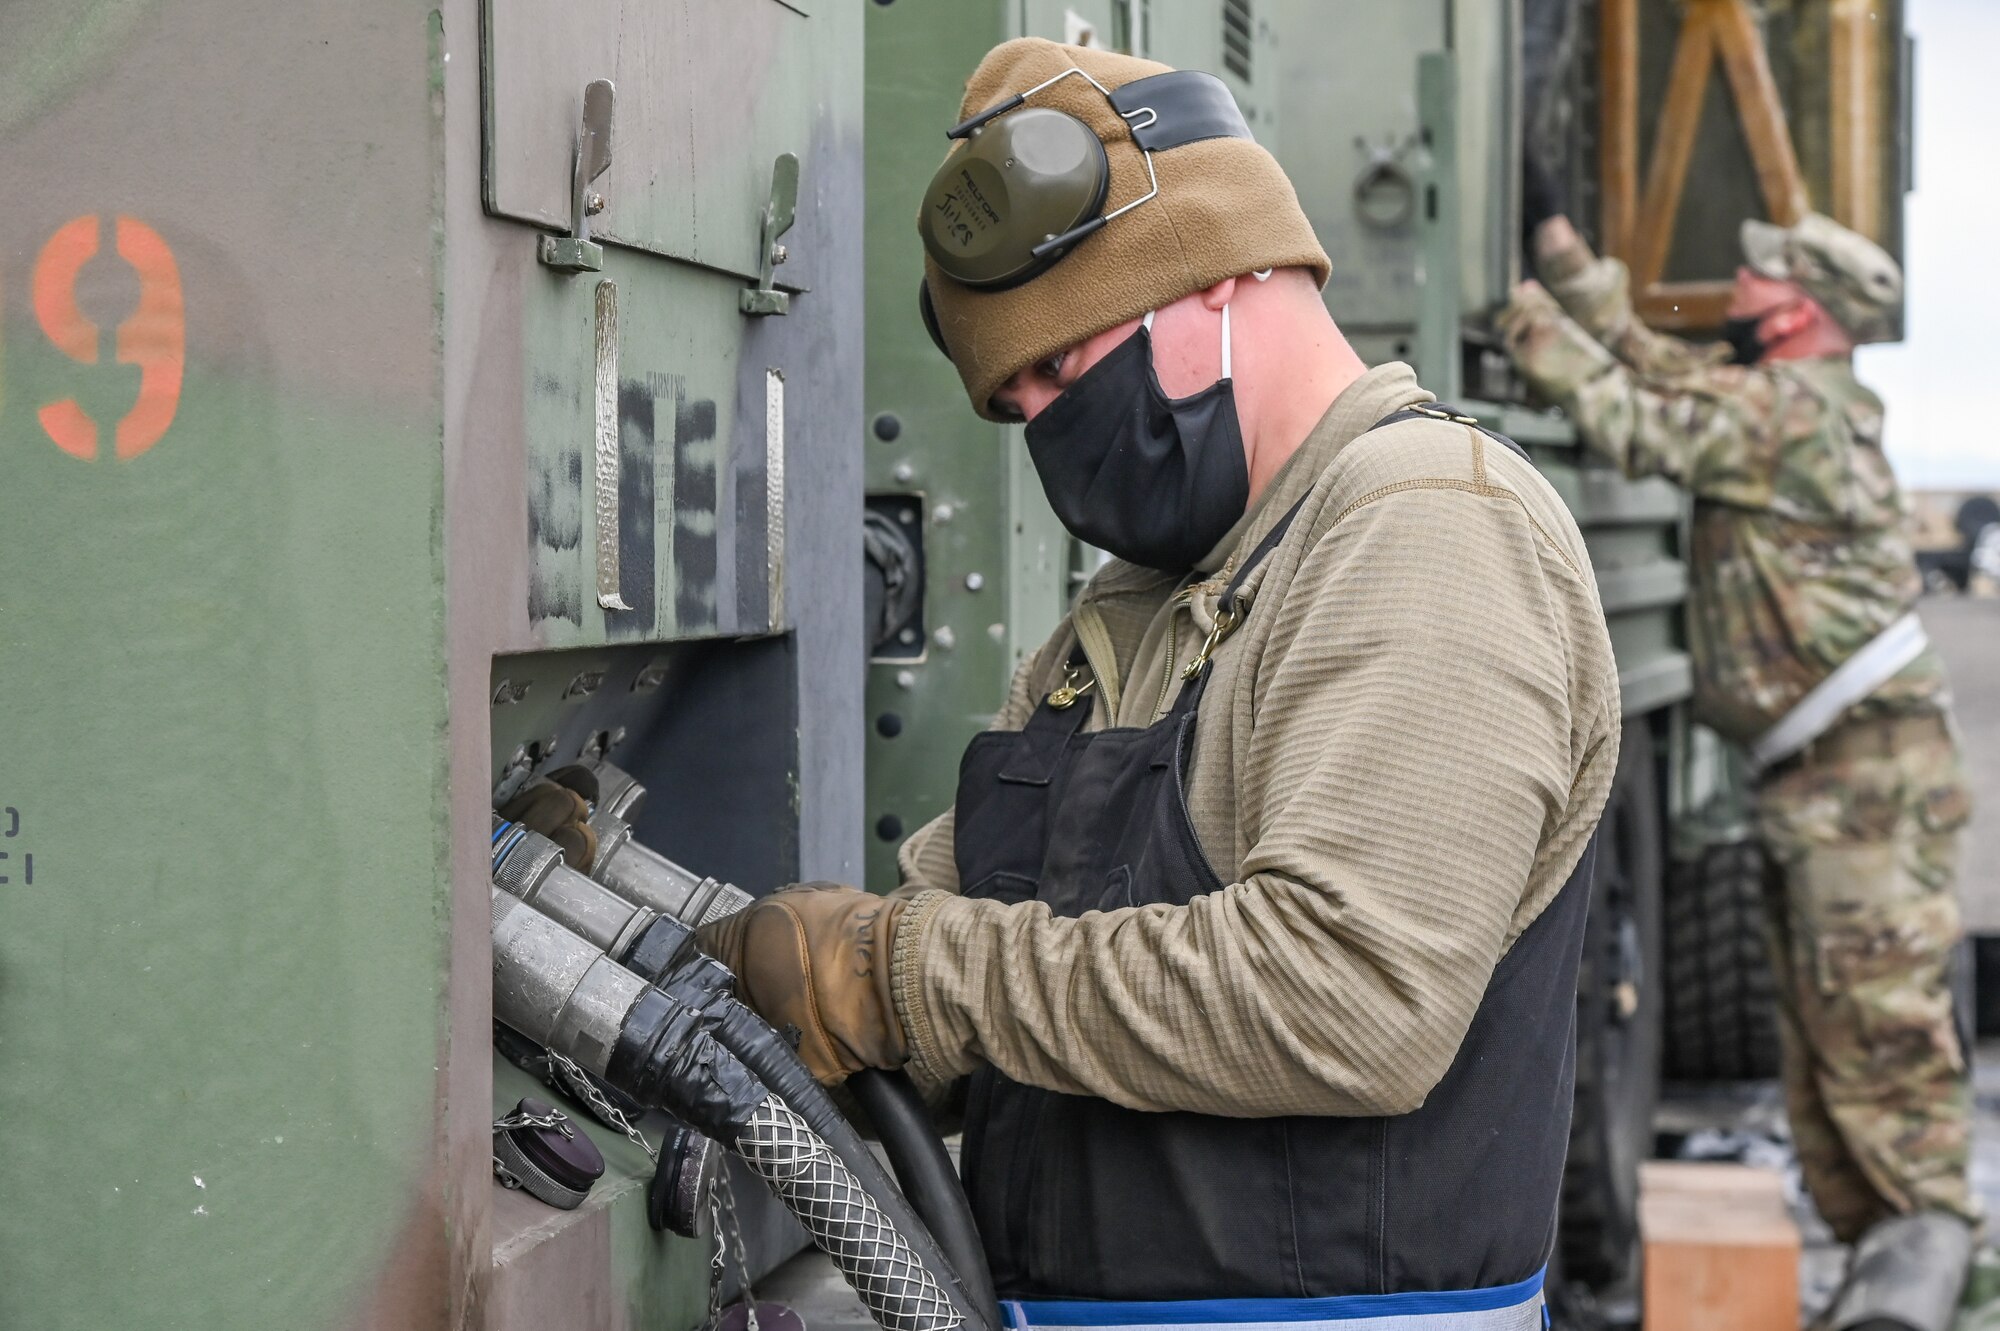 An Airman hooking up an electric cable to a generator.